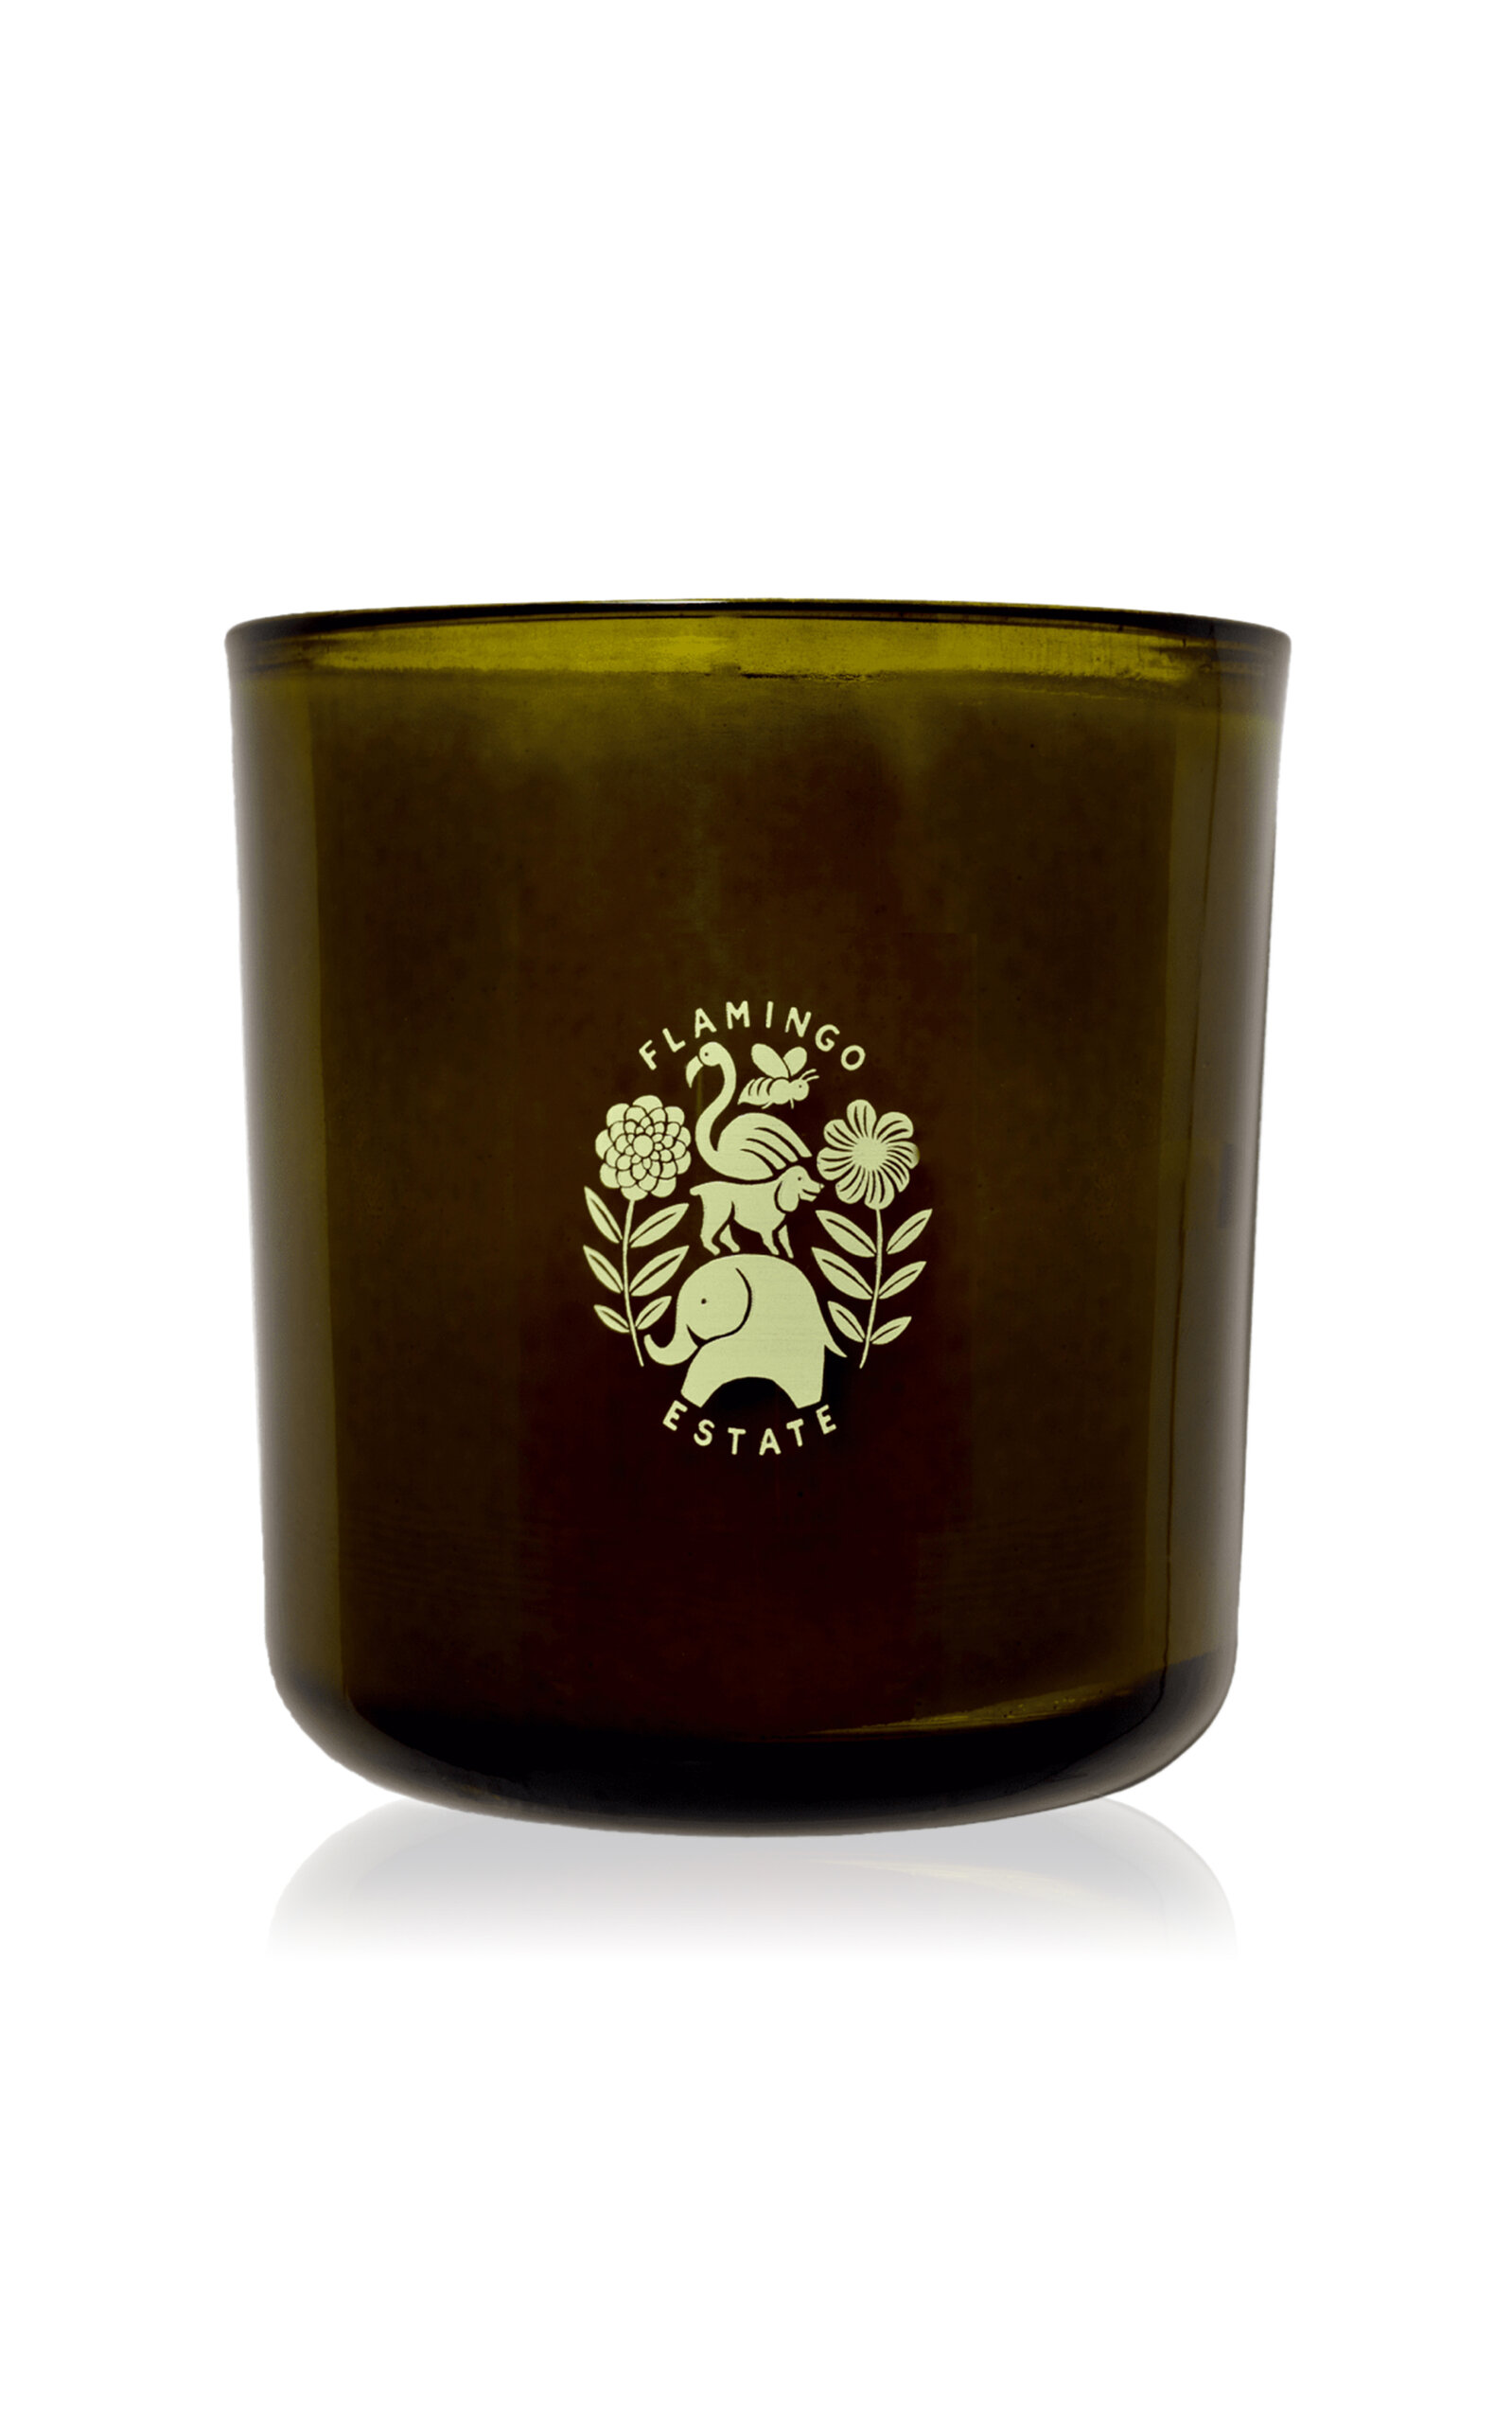 Flamingo Estate Jasmine And Damask Rose Candle In Green